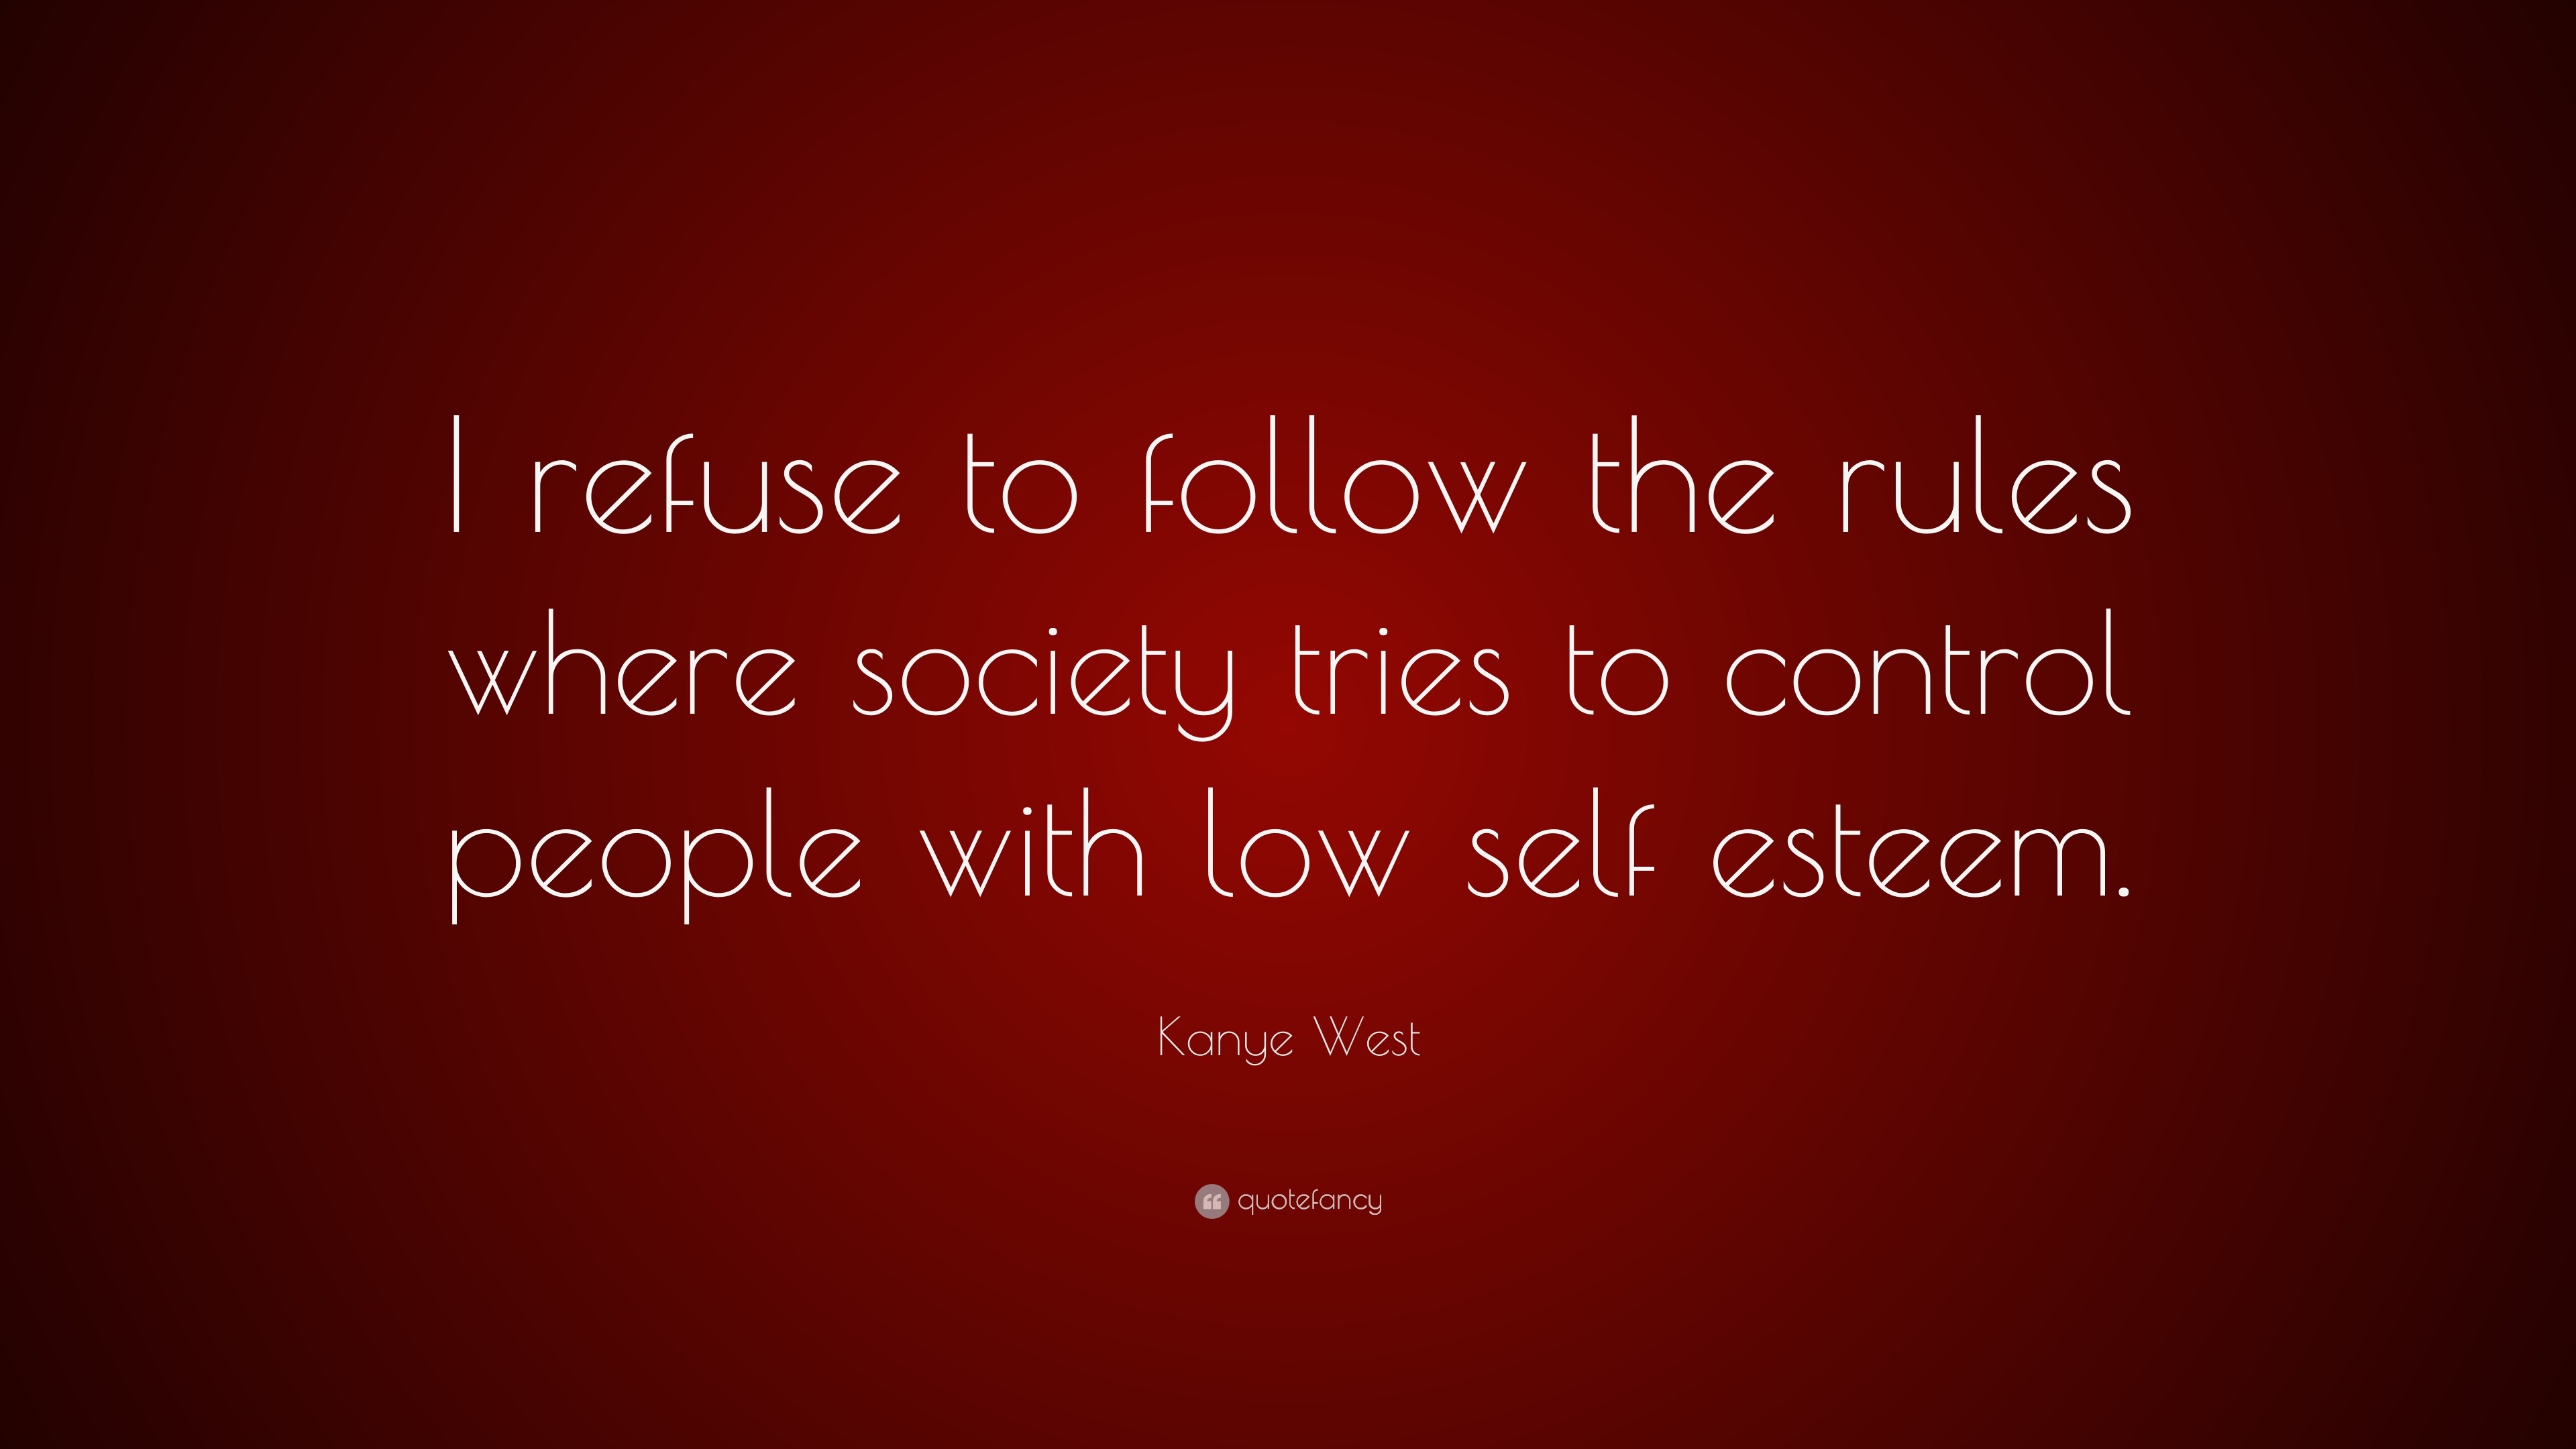 Kanye West Quote: “I refuse to follow the rules where society tries to  control people with